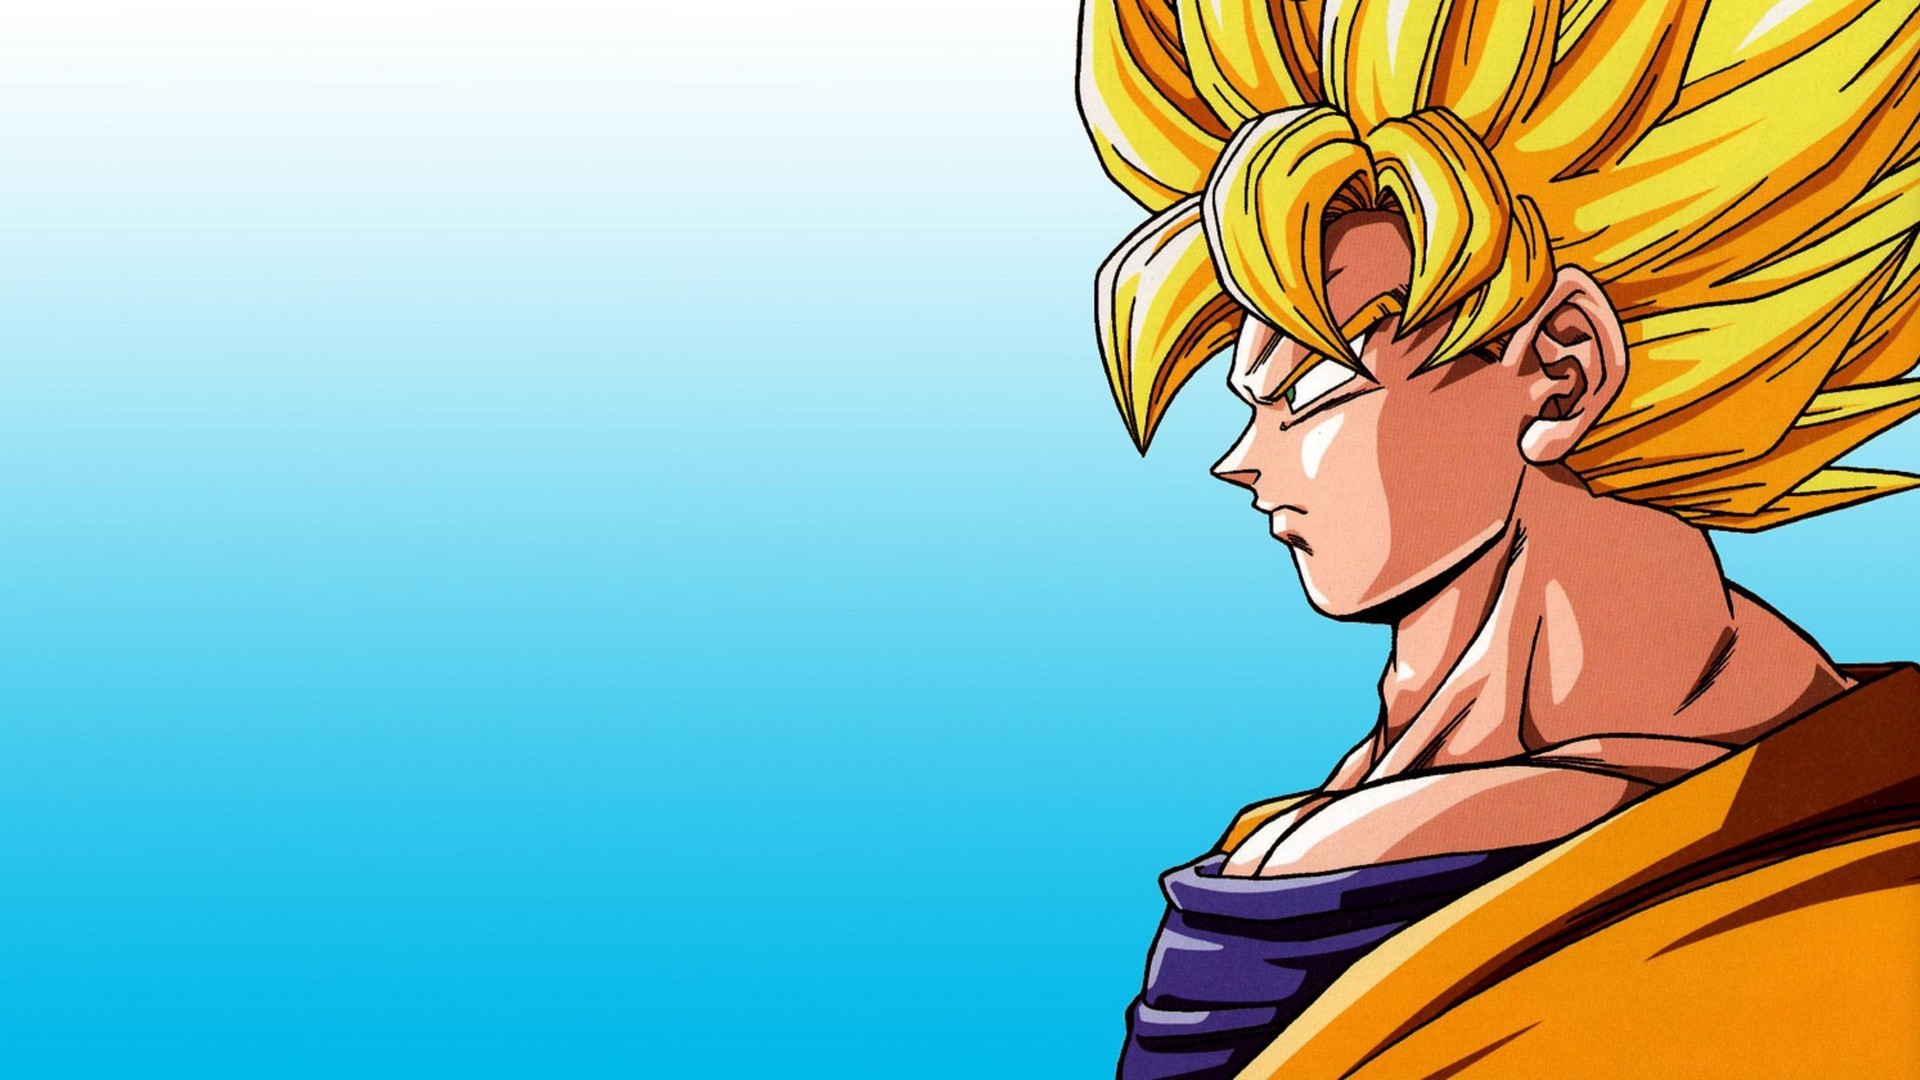 Wallpaper Goku Super Saiyan with image resolution 1920x1080 pixel. You can use this wallpaper as background for your desktop Computer Screensavers, Android or iPhone smartphones